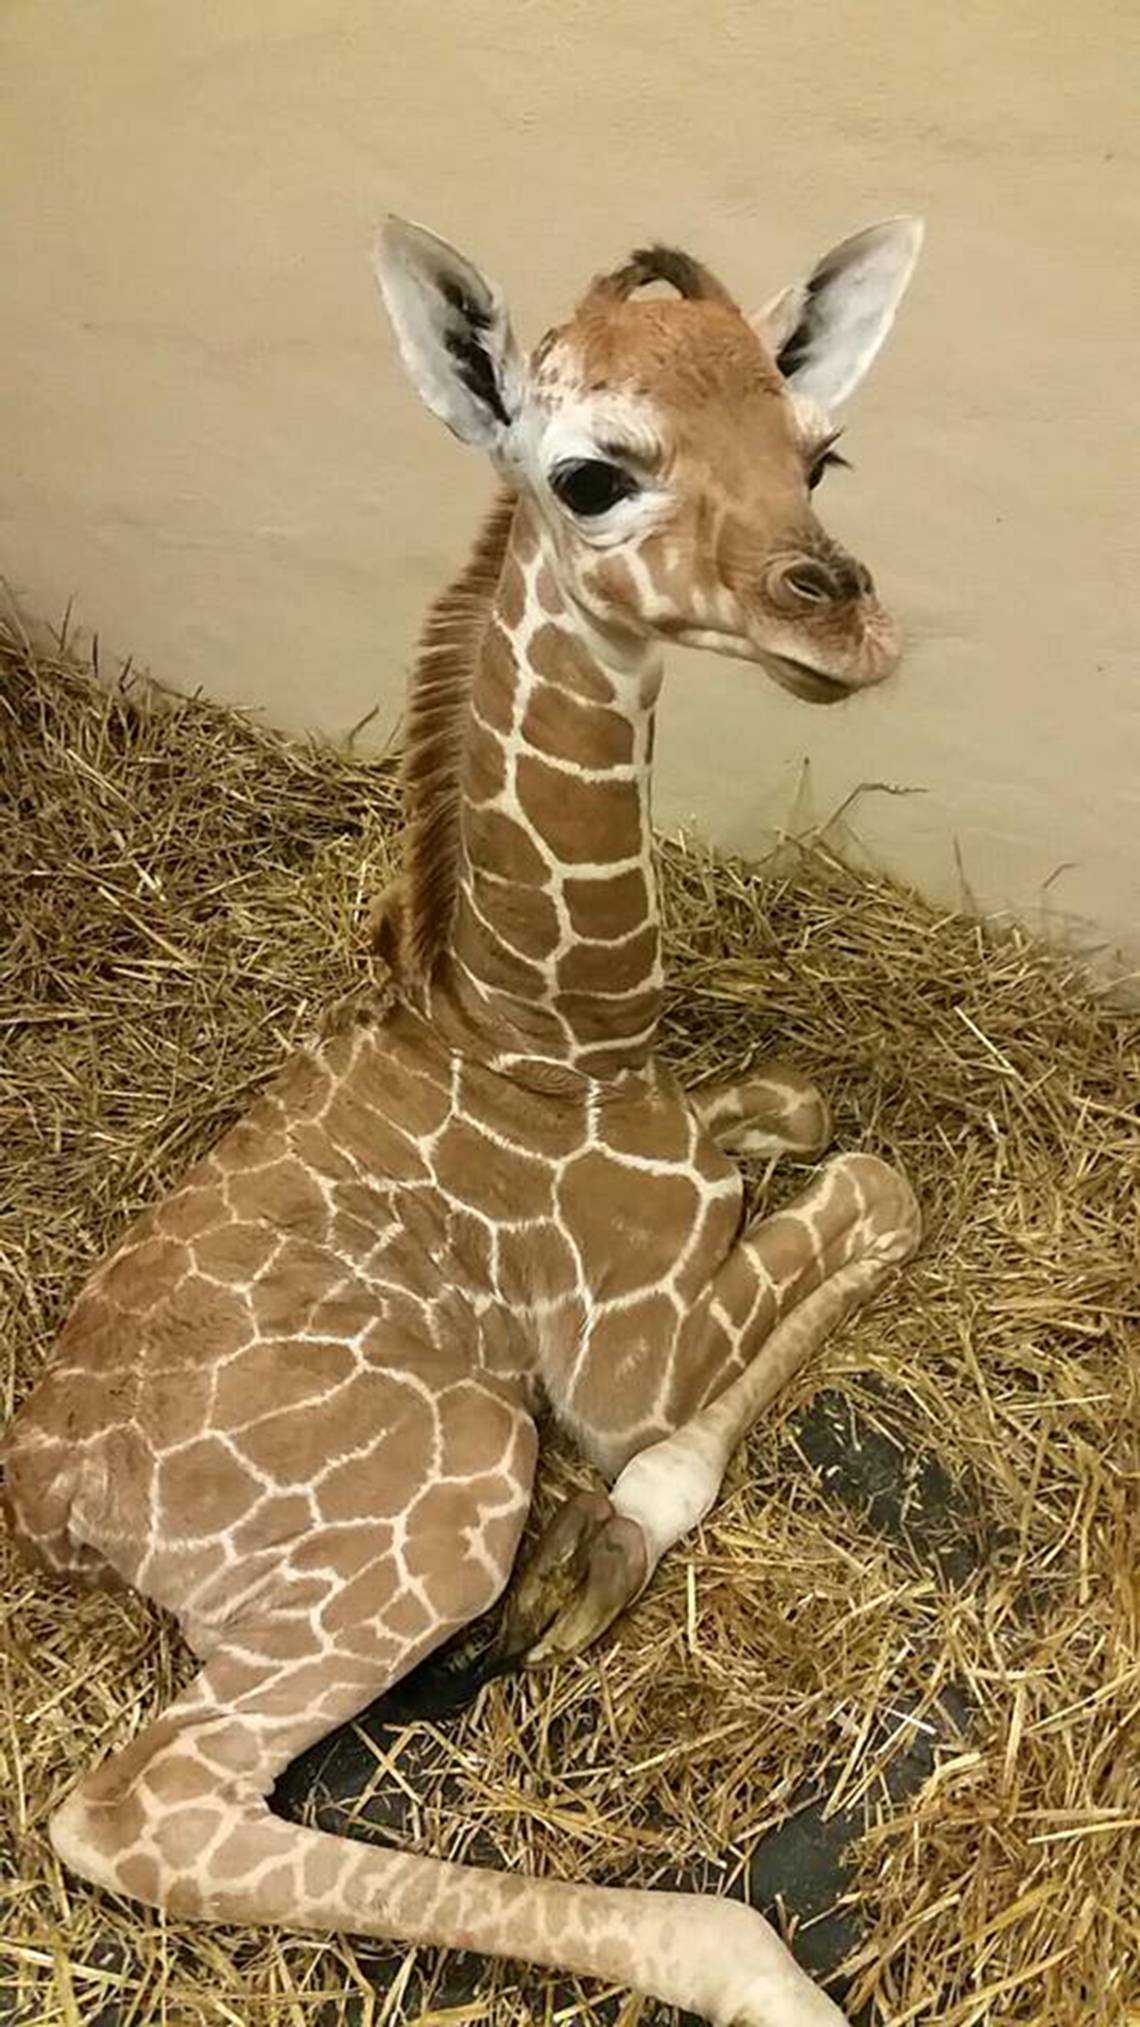 Riverbanks Zoo announces birth of giraffe | The State